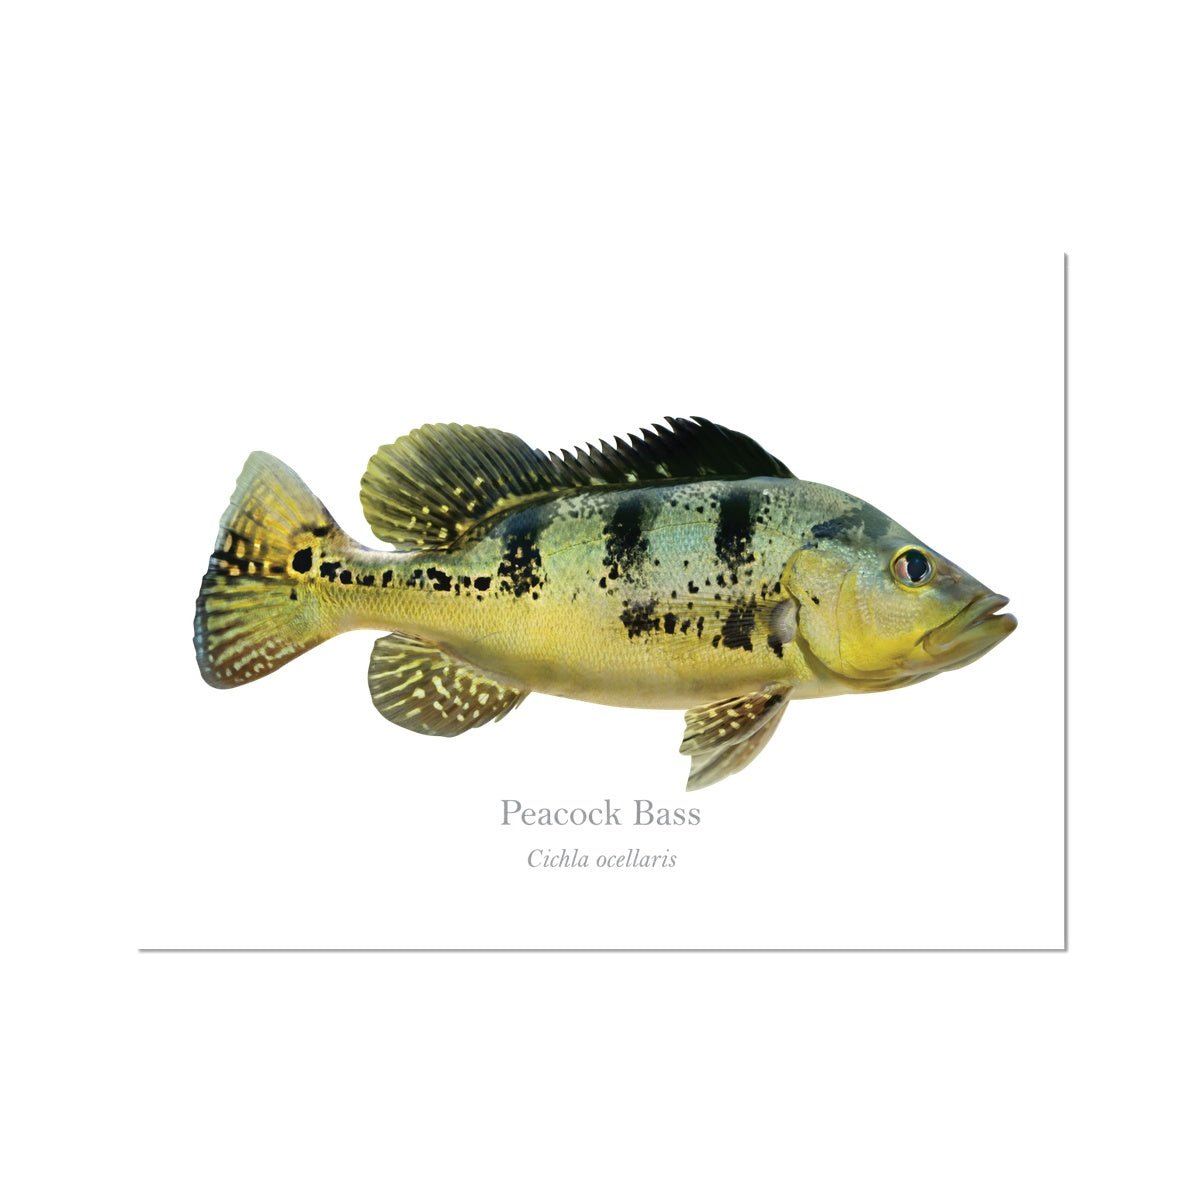 Peacock Bass - Art Print - With Scientific Name –